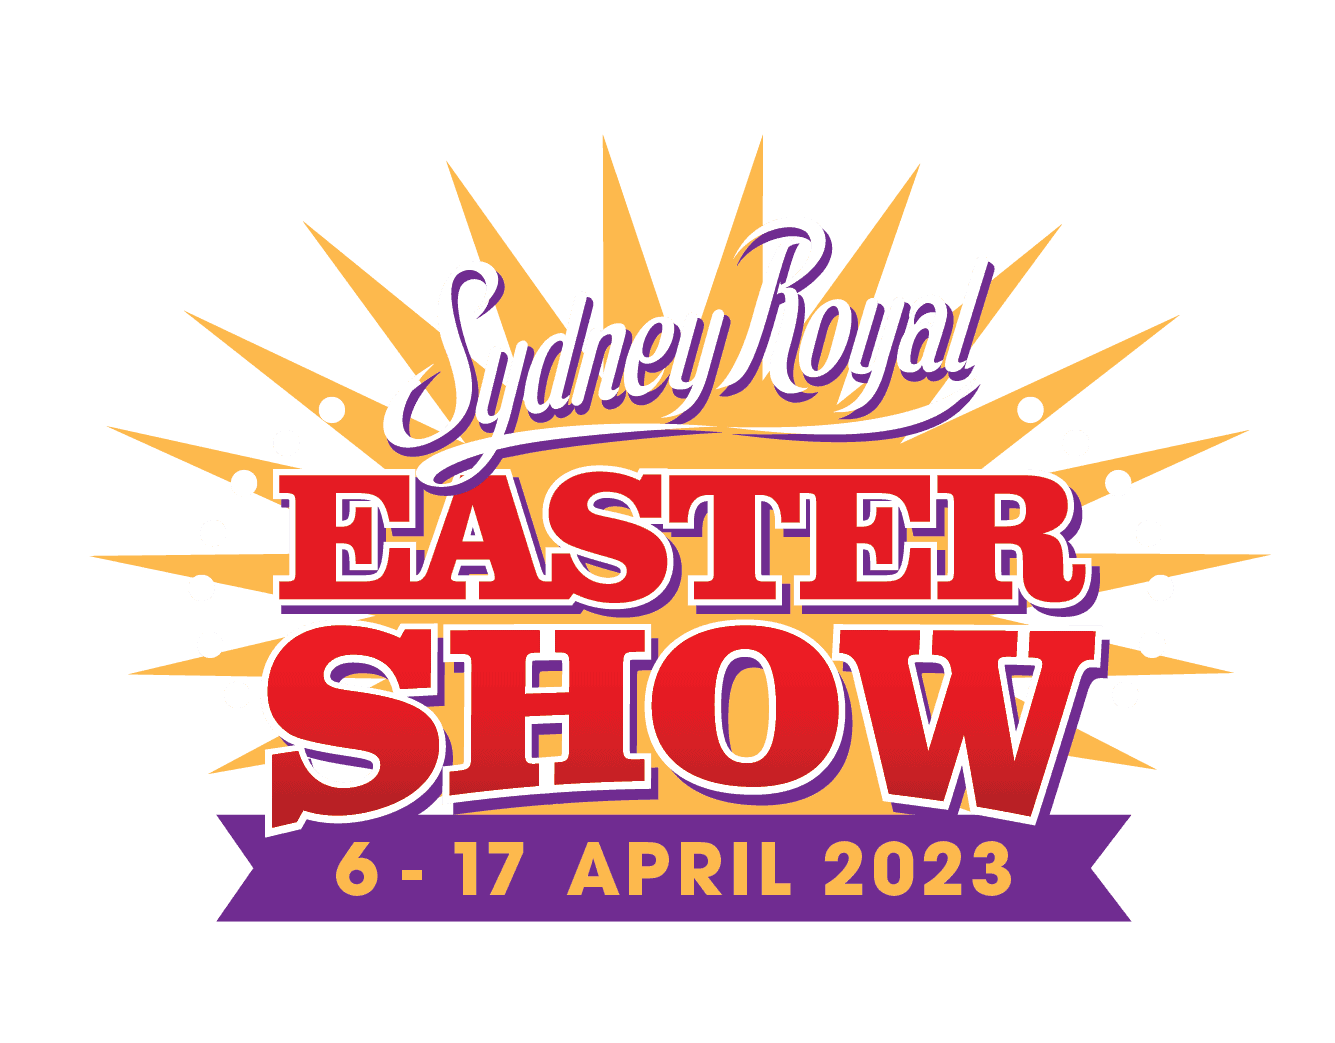 Get Your Royal Easter Show Sydney Tickets Today